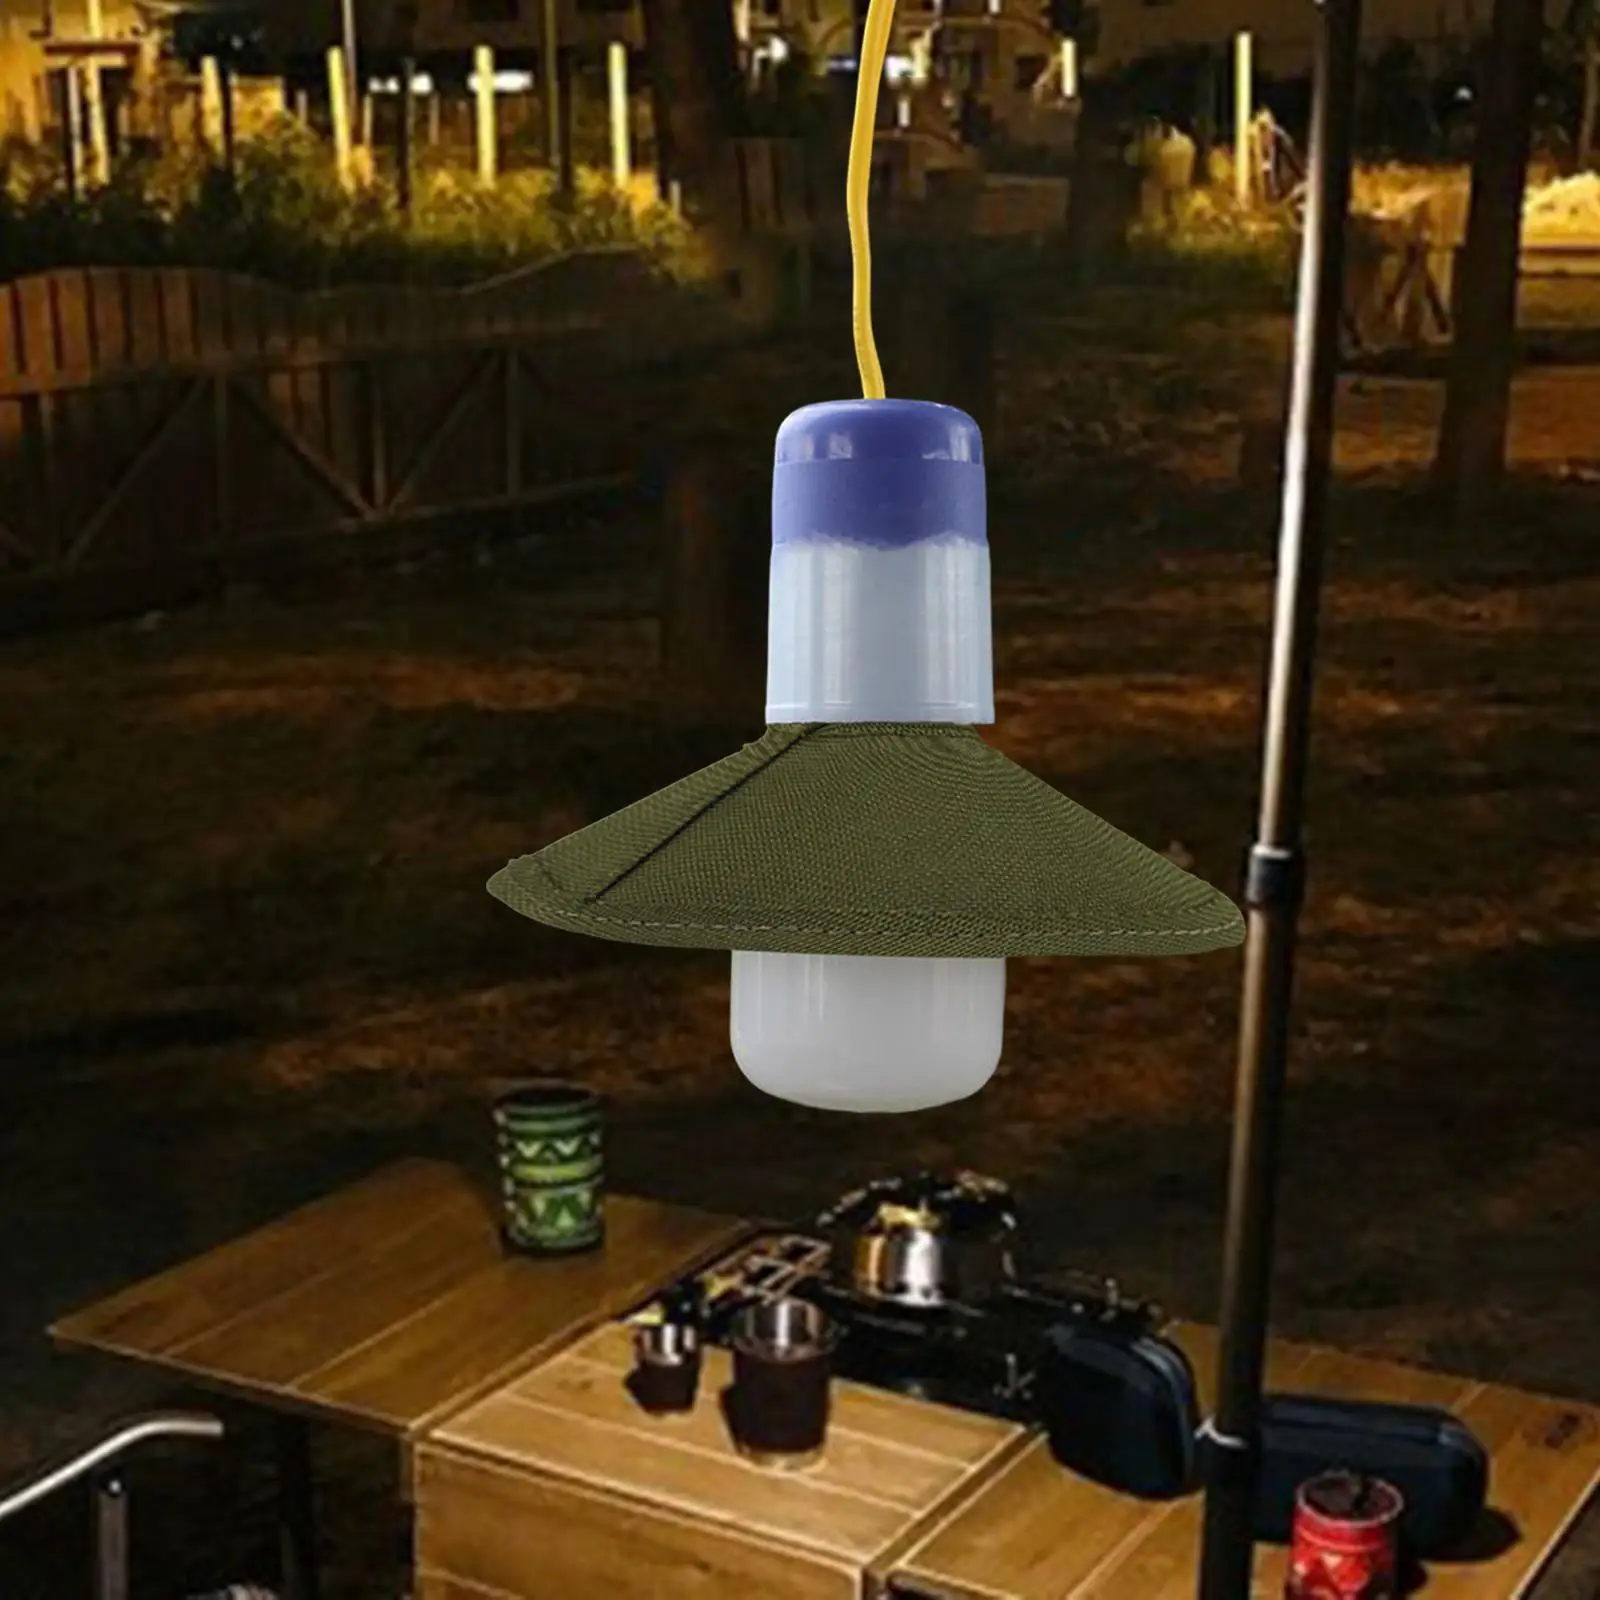 1x Lamp Shade Canvas Decor Replacement Light Fixtures Lighting Cover Fashion Compatible Dustproof for Camping Bedroom Restaurant